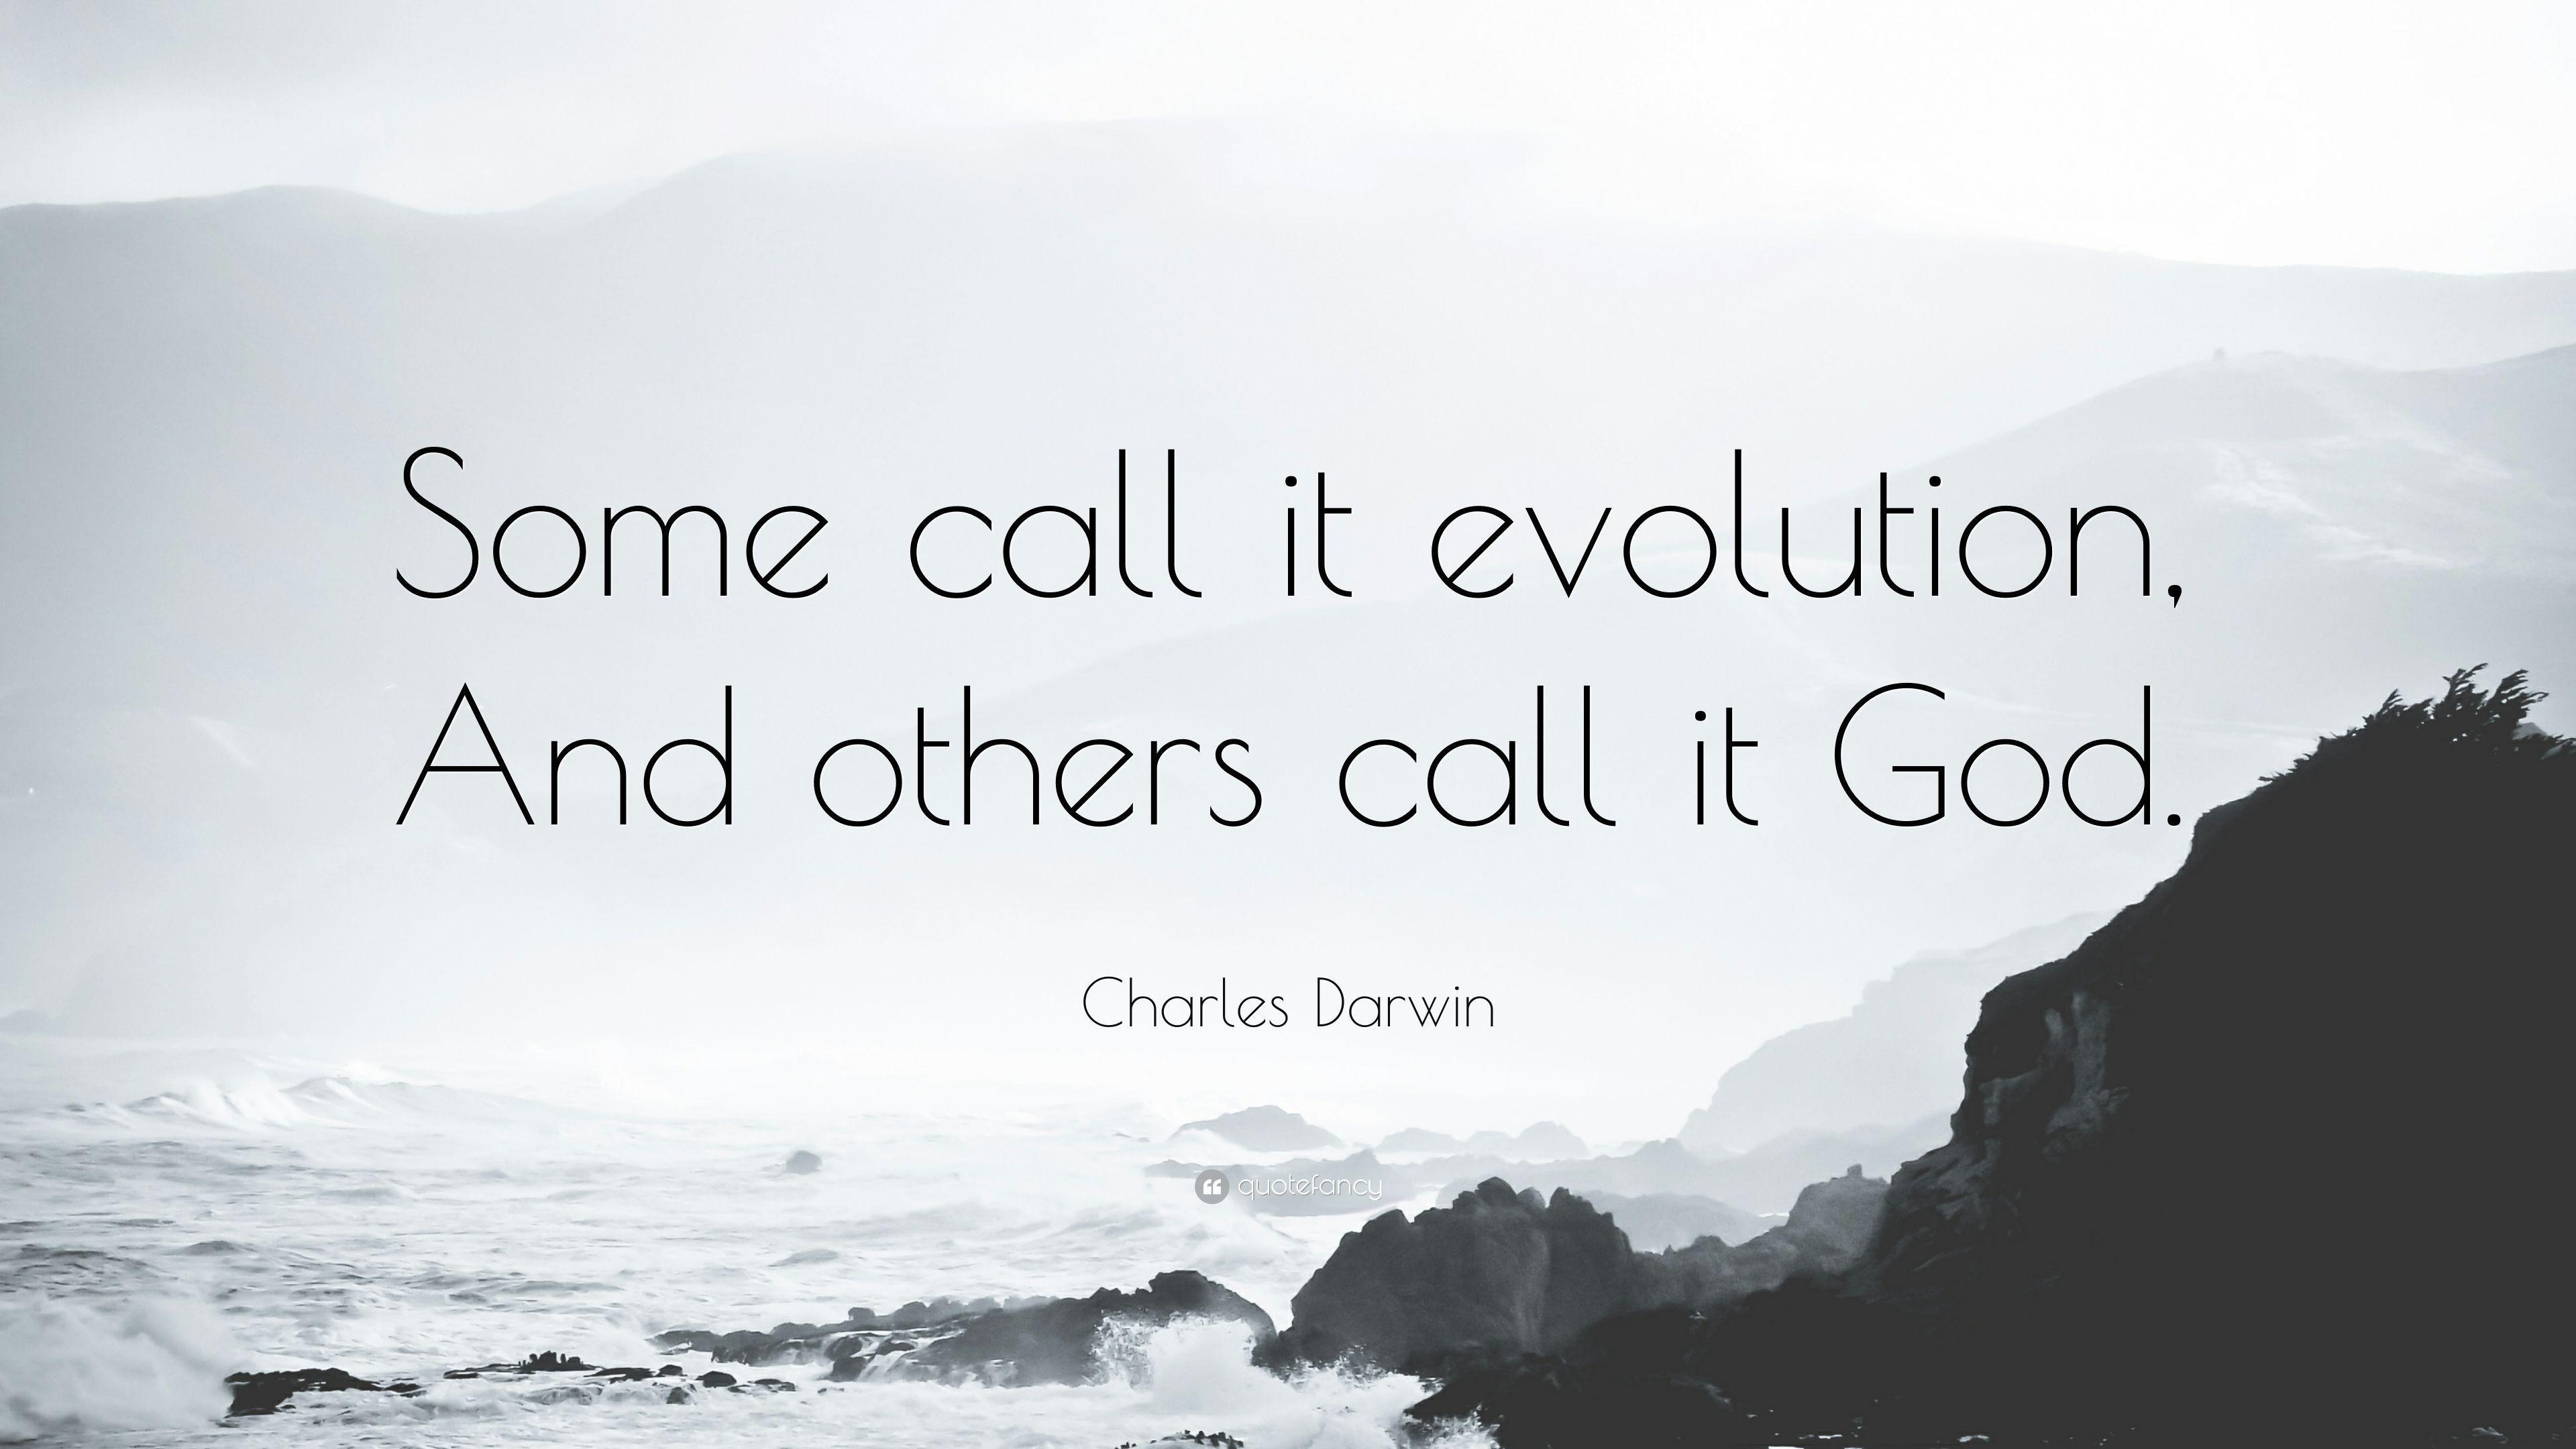 Charles Darwin Quote: “Some call it evolution, And others call it